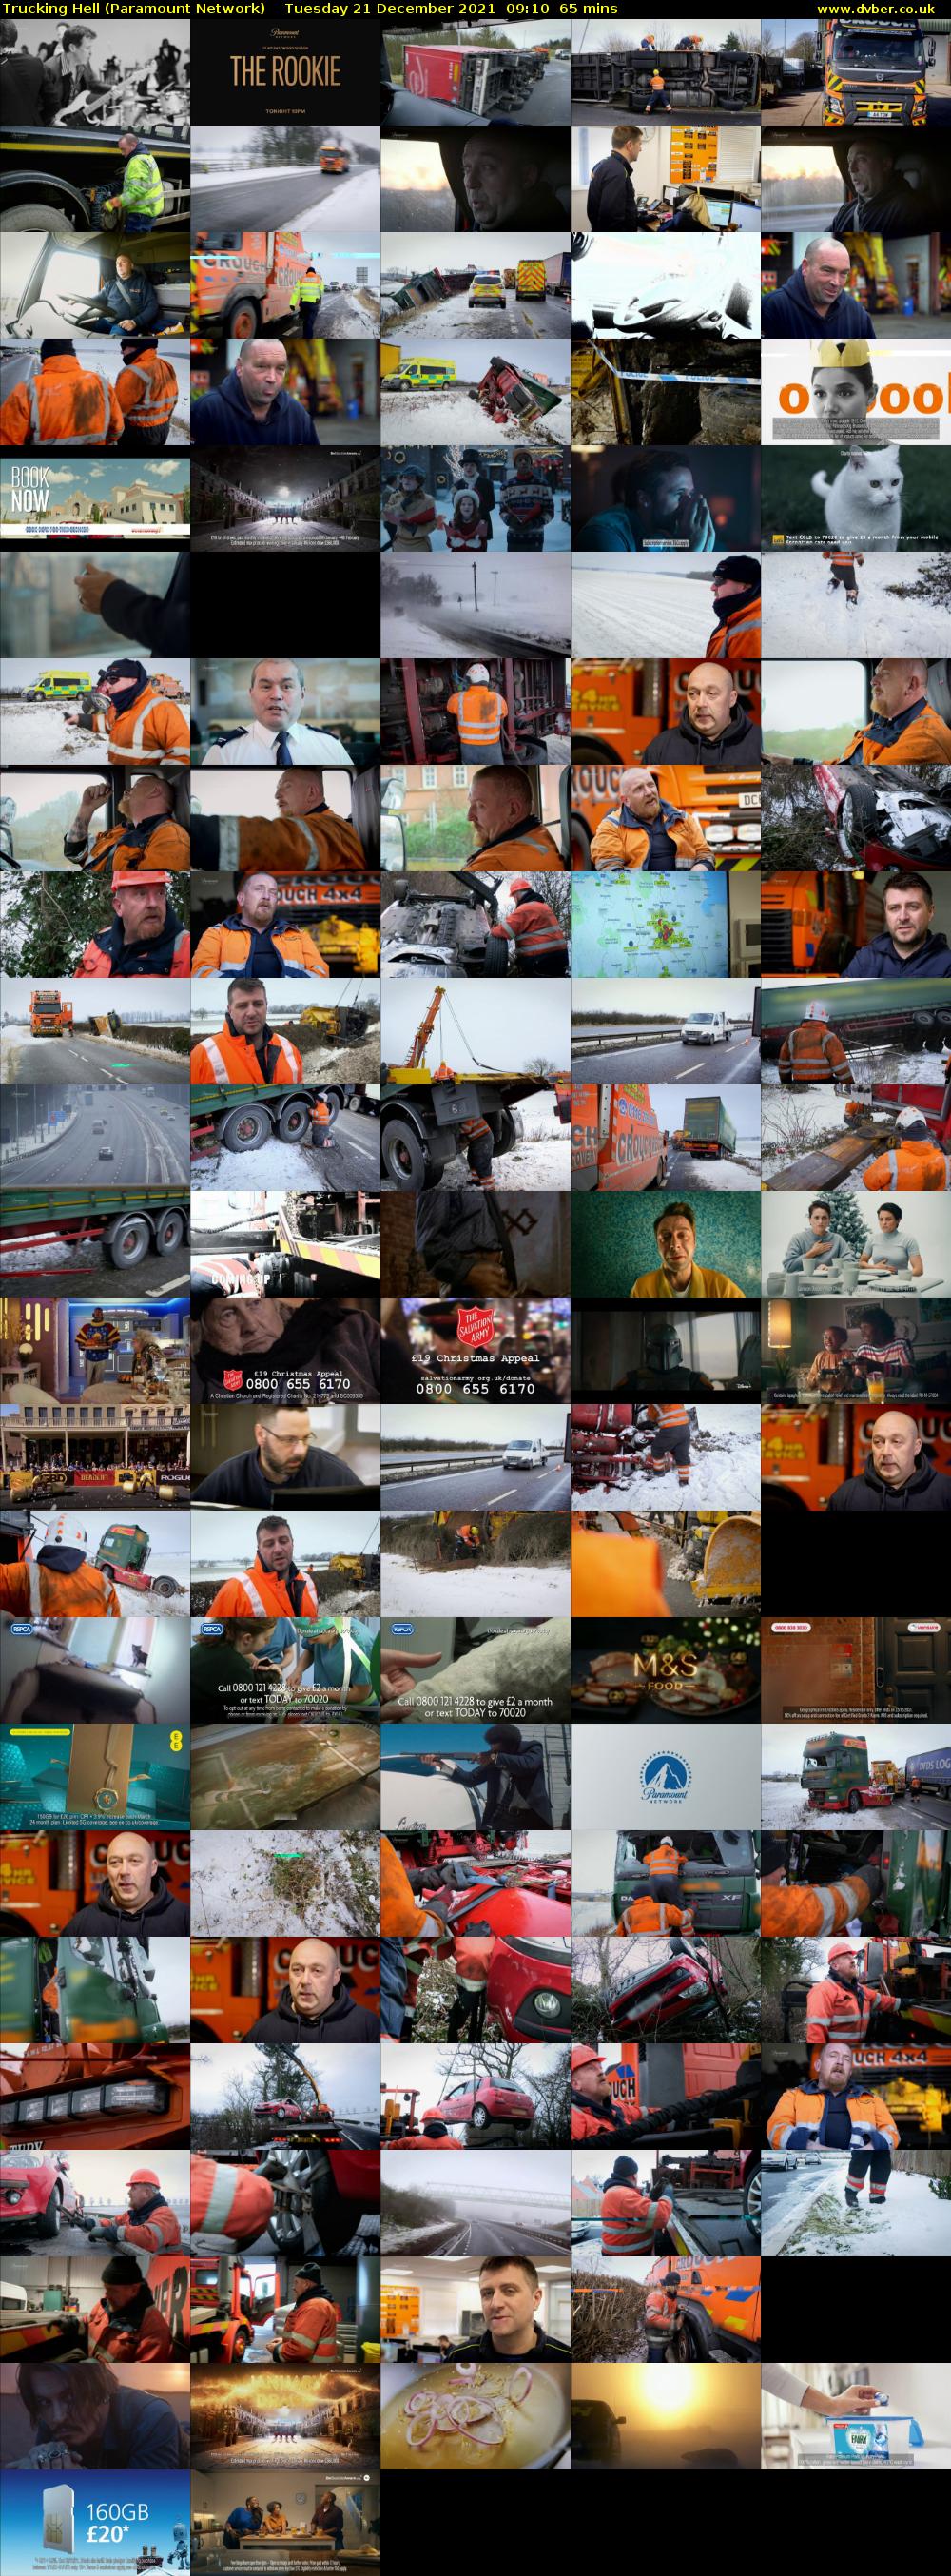 Trucking Hell (Paramount Network) Tuesday 21 December 2021 09:10 - 10:15